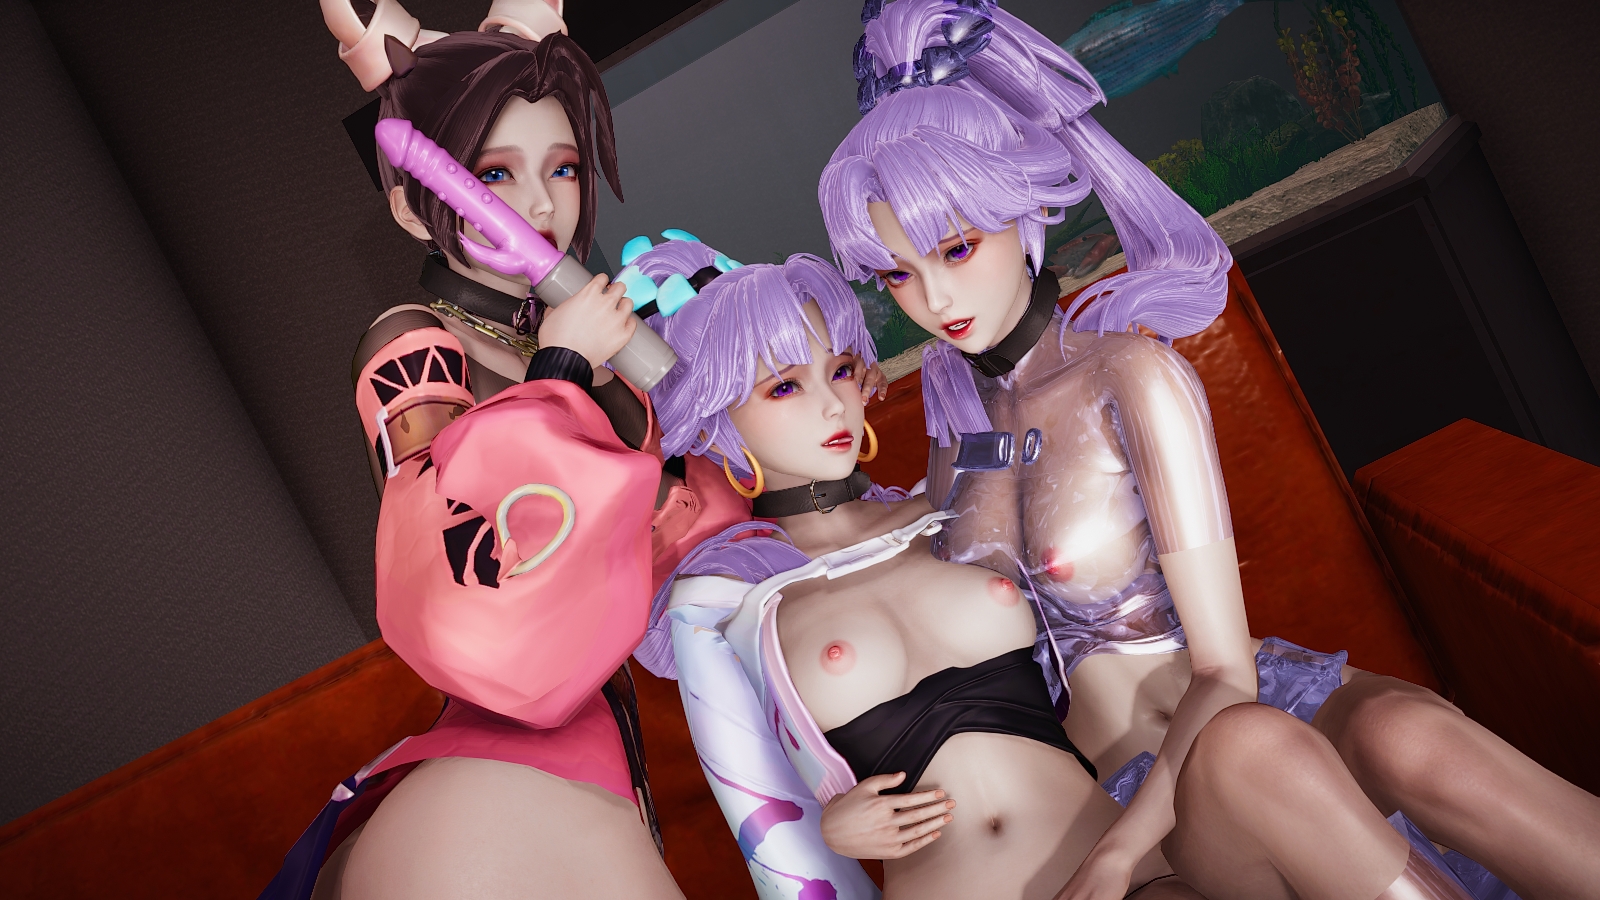 Honey Select 2 (婉儿的百合乐园) Honey Select 2 Petite Teen Hentai 3d Porn Pussy Pink Nipples Natural Boobs Natural Tits Sex Nude Naked Threesome Pussy Insertion Dildo Sex Toy Lesbian Sapphic Masturbating Licking Feet 10